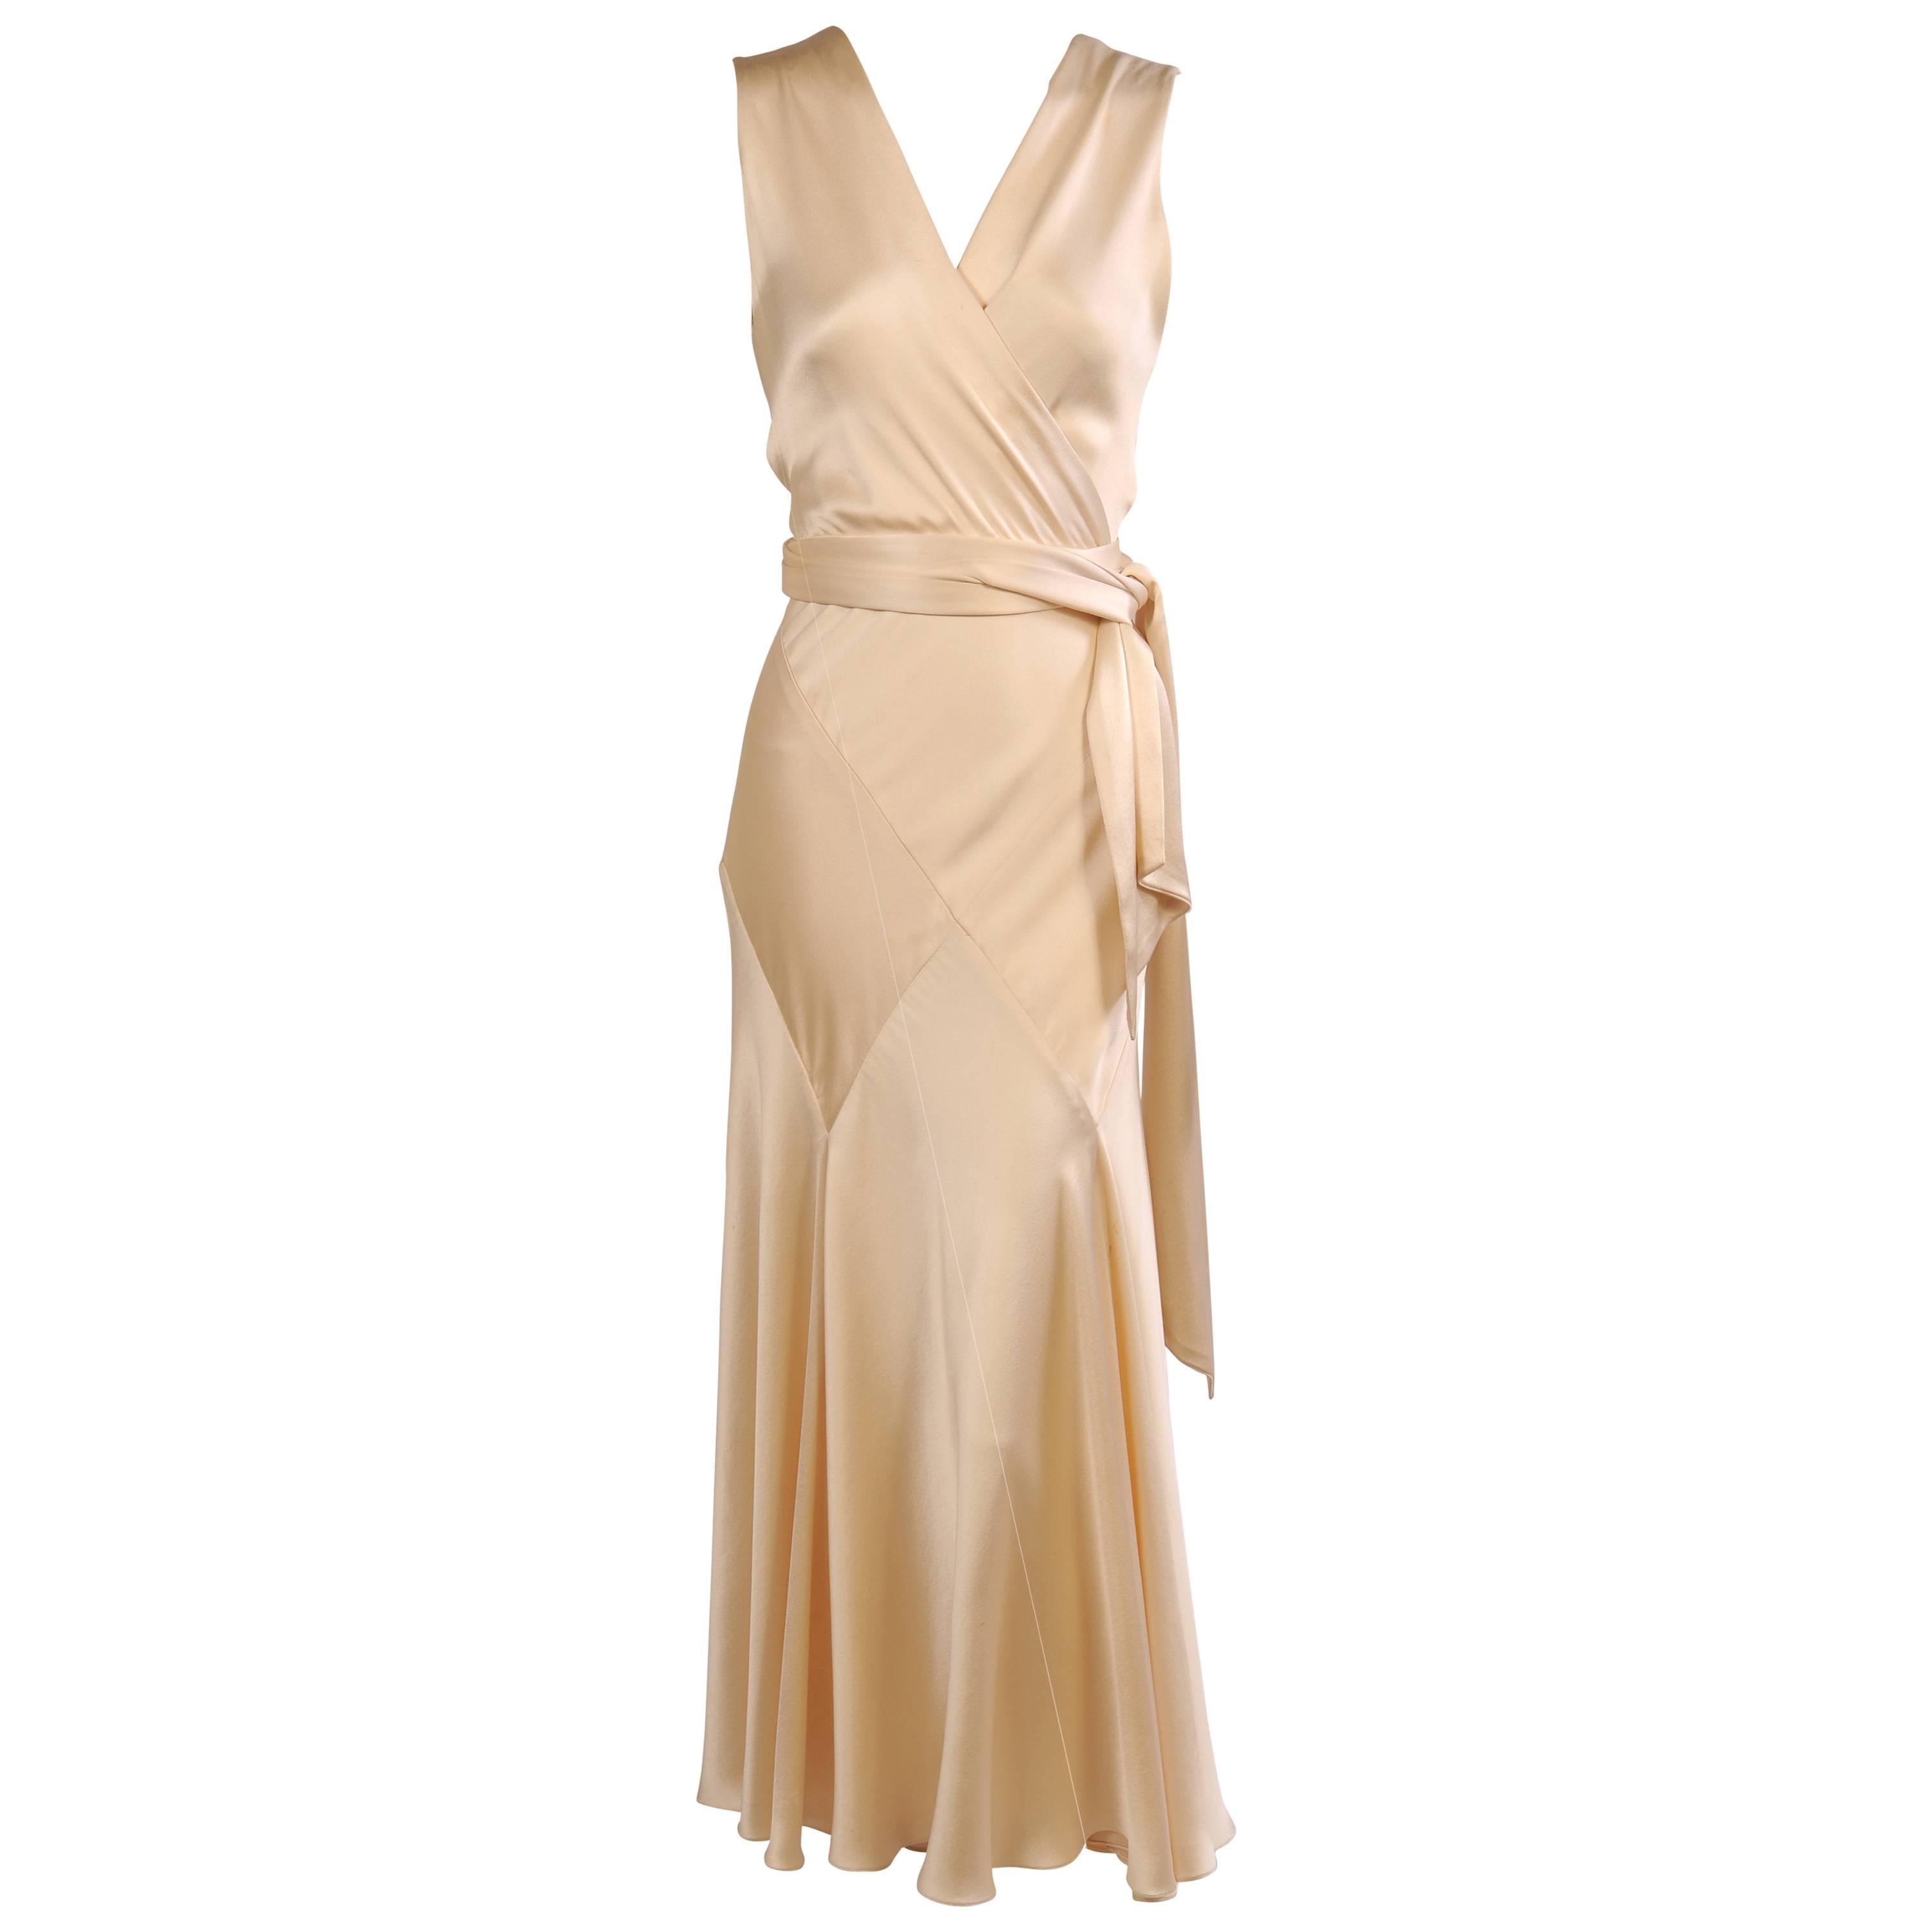 Maggie Norris Haute Couture 1930's Inspired Bias Cut Silk Charmeuse Evening Gown